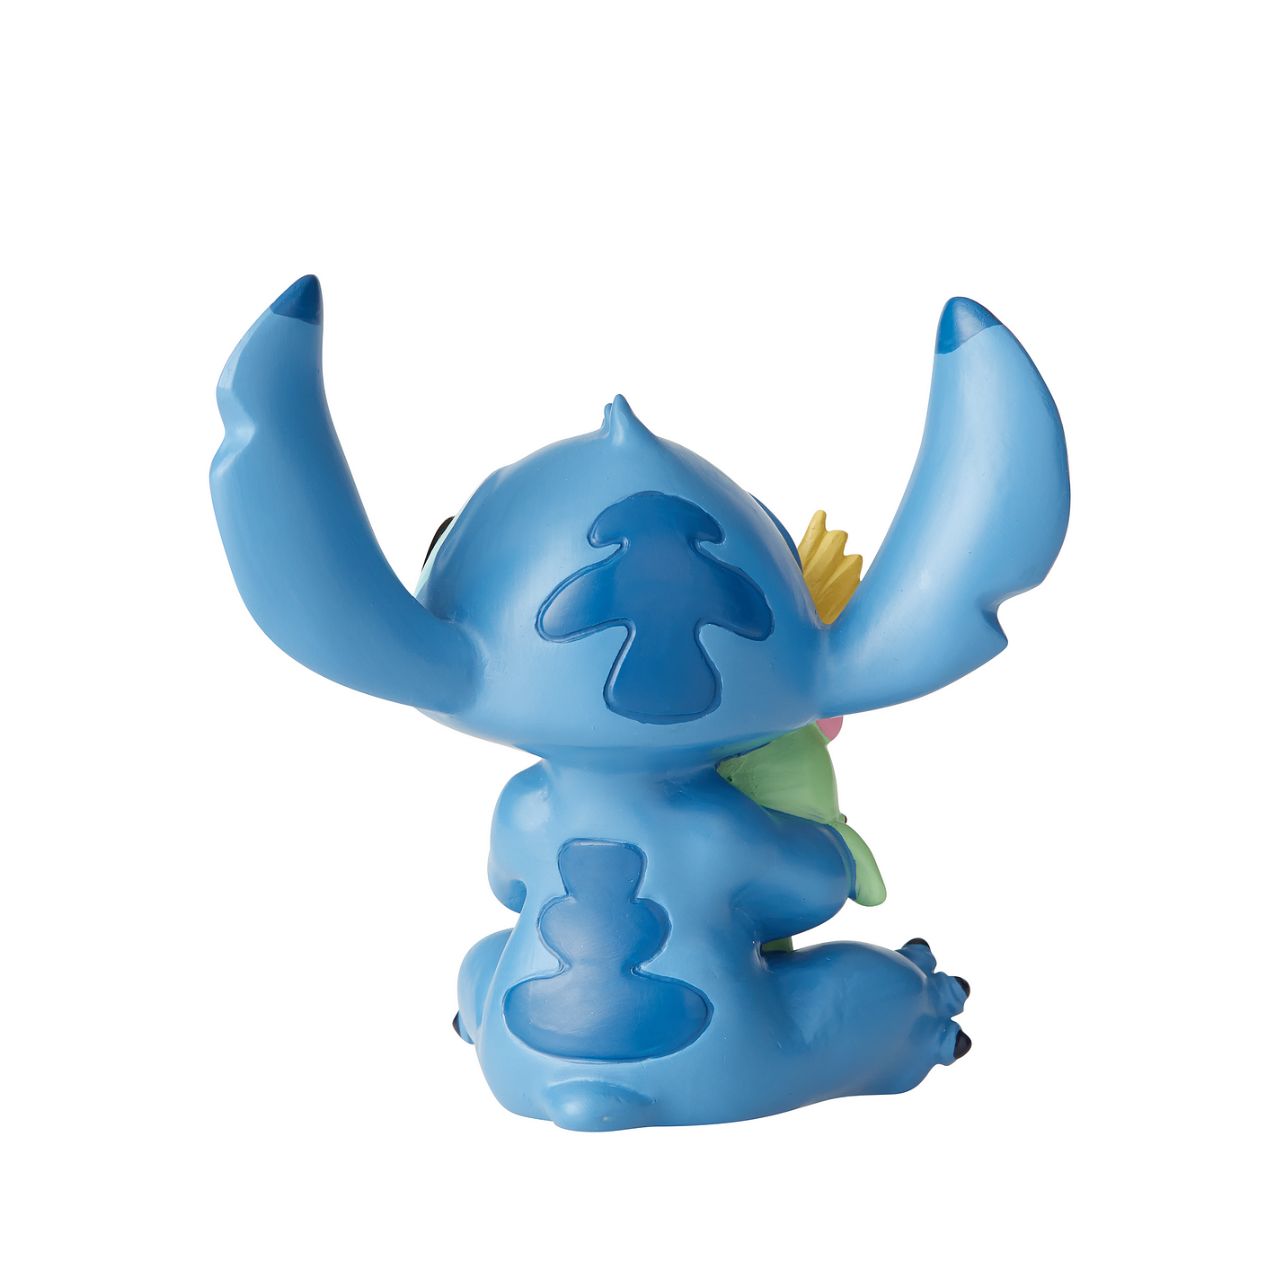 Disney Showcase Stitch Doll Figurine  Irresistibly adorable, this little Stitch will make you want to give your best friend the same tight squeeze he's giving his doll. 'Ohana means family, make him a part of yours.